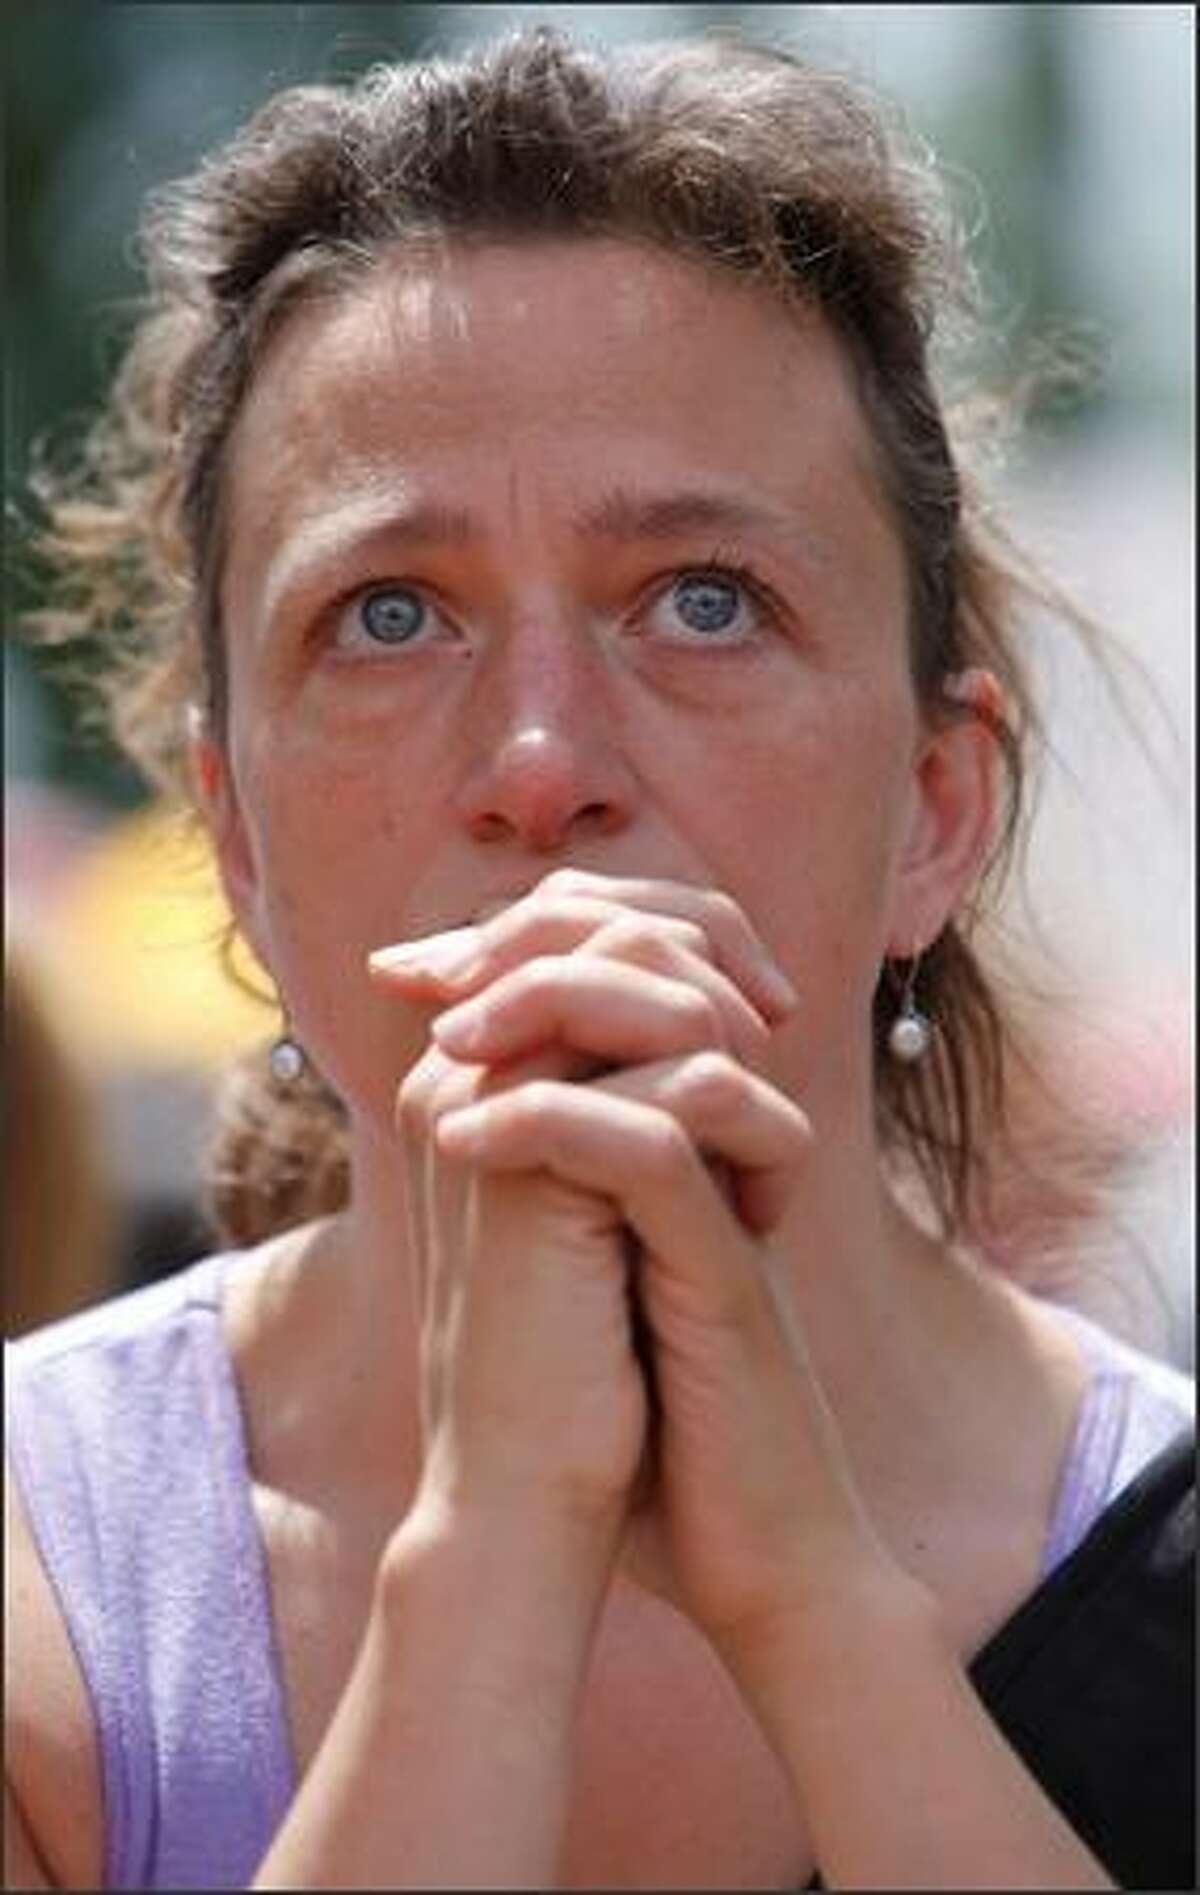 Seattle resident Jen Vetrovs tears up while hearing a story about a young boy's mother who died.